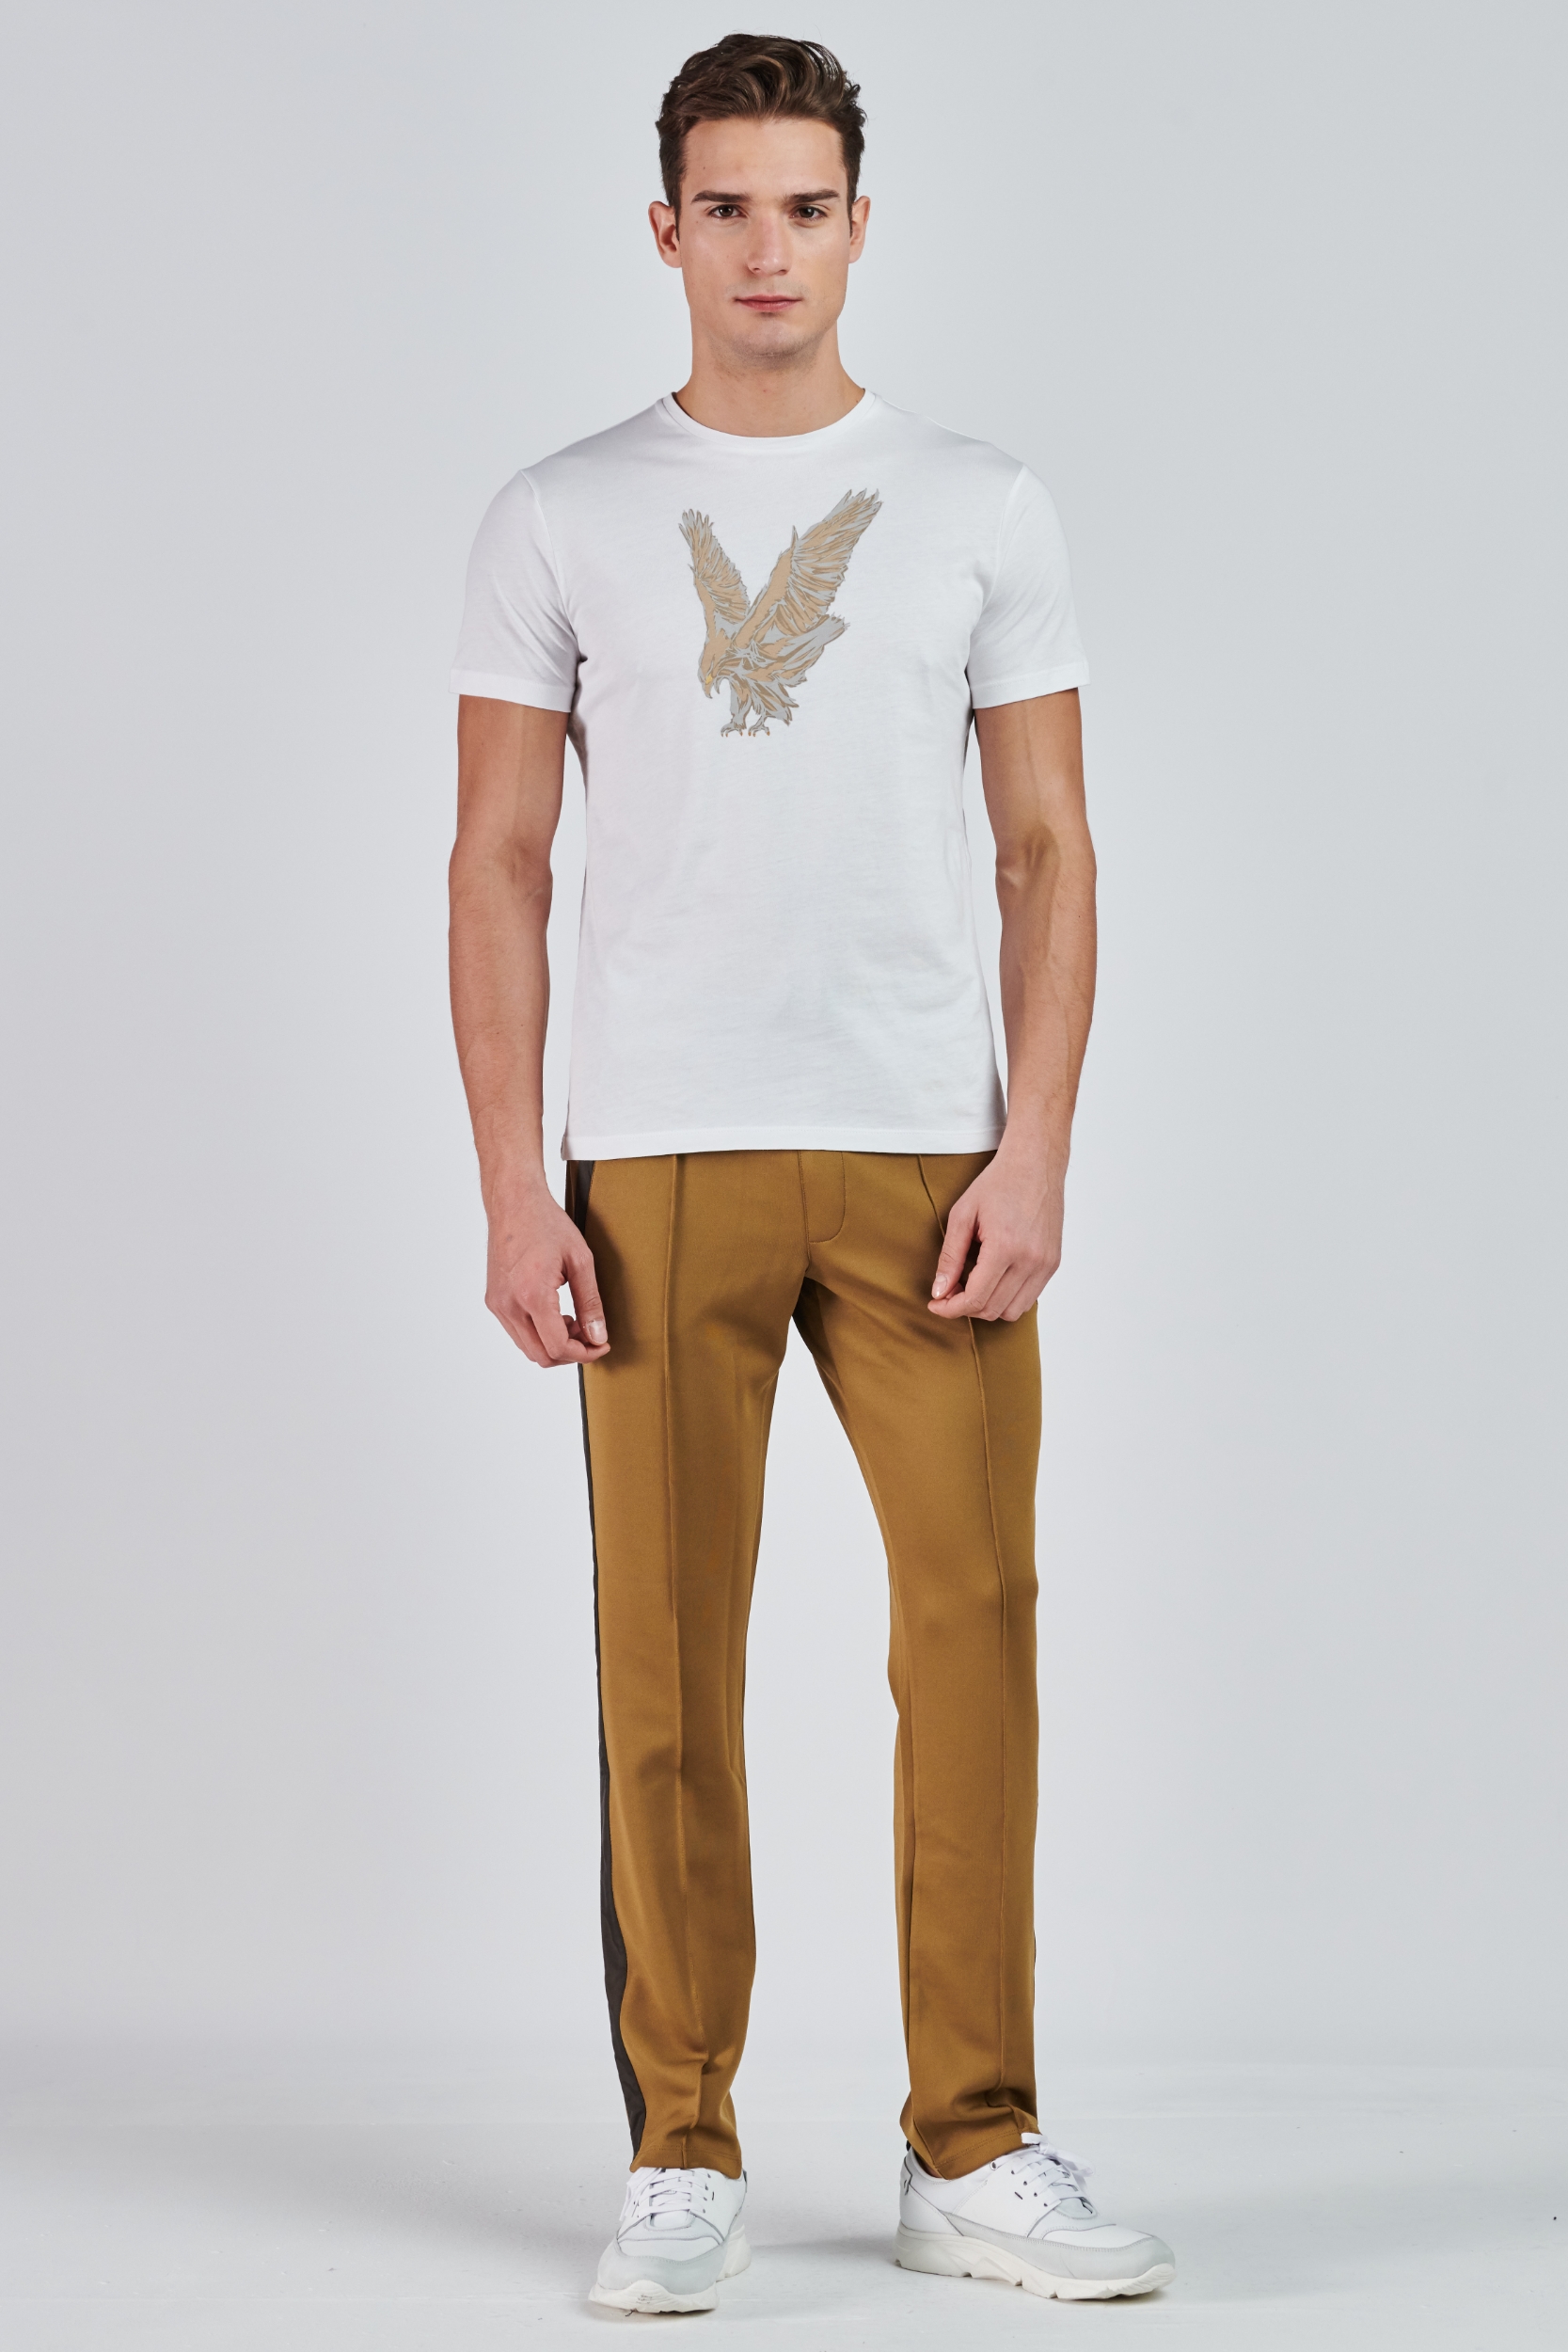 Picture of Giovane G. Designers T-shirt